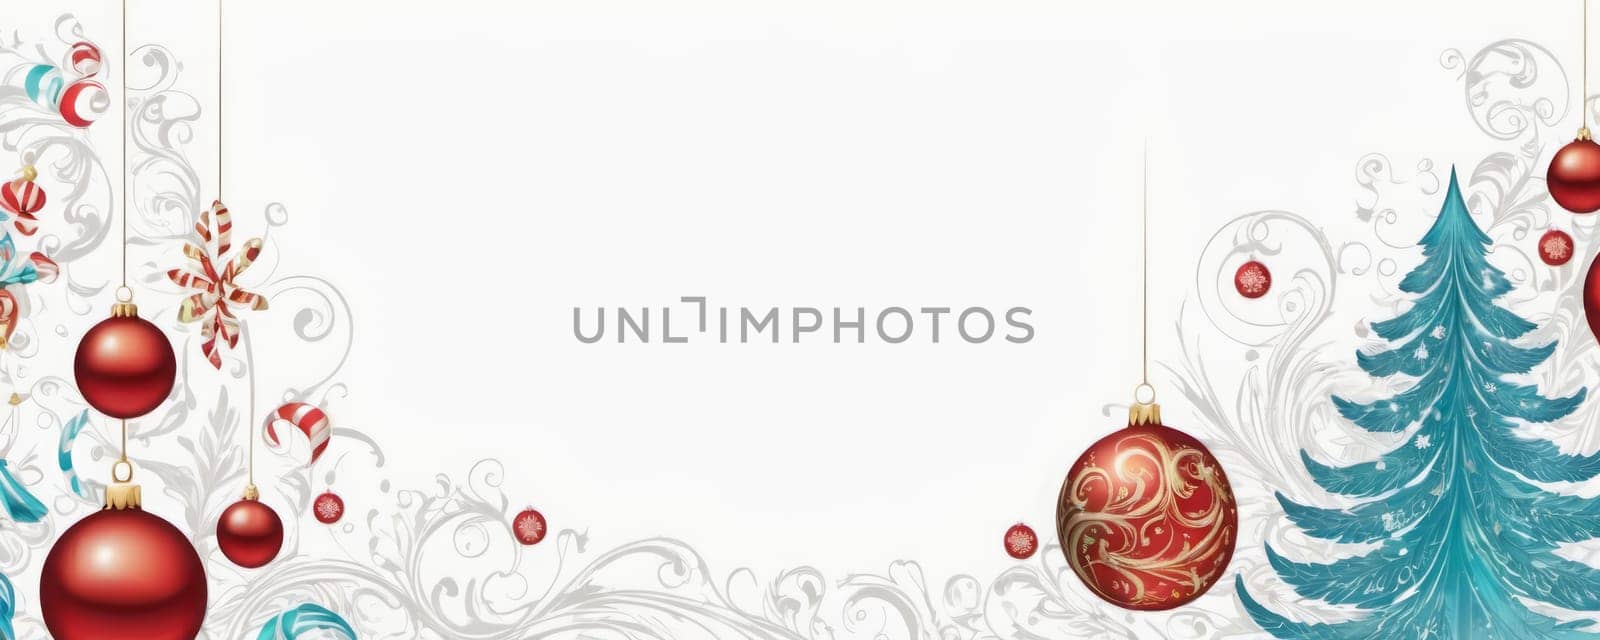 A Christmas-themed banner featuring red ornaments, candy canes, and a stylized blue tree against a snowy white background, evoking a warm holiday spirit